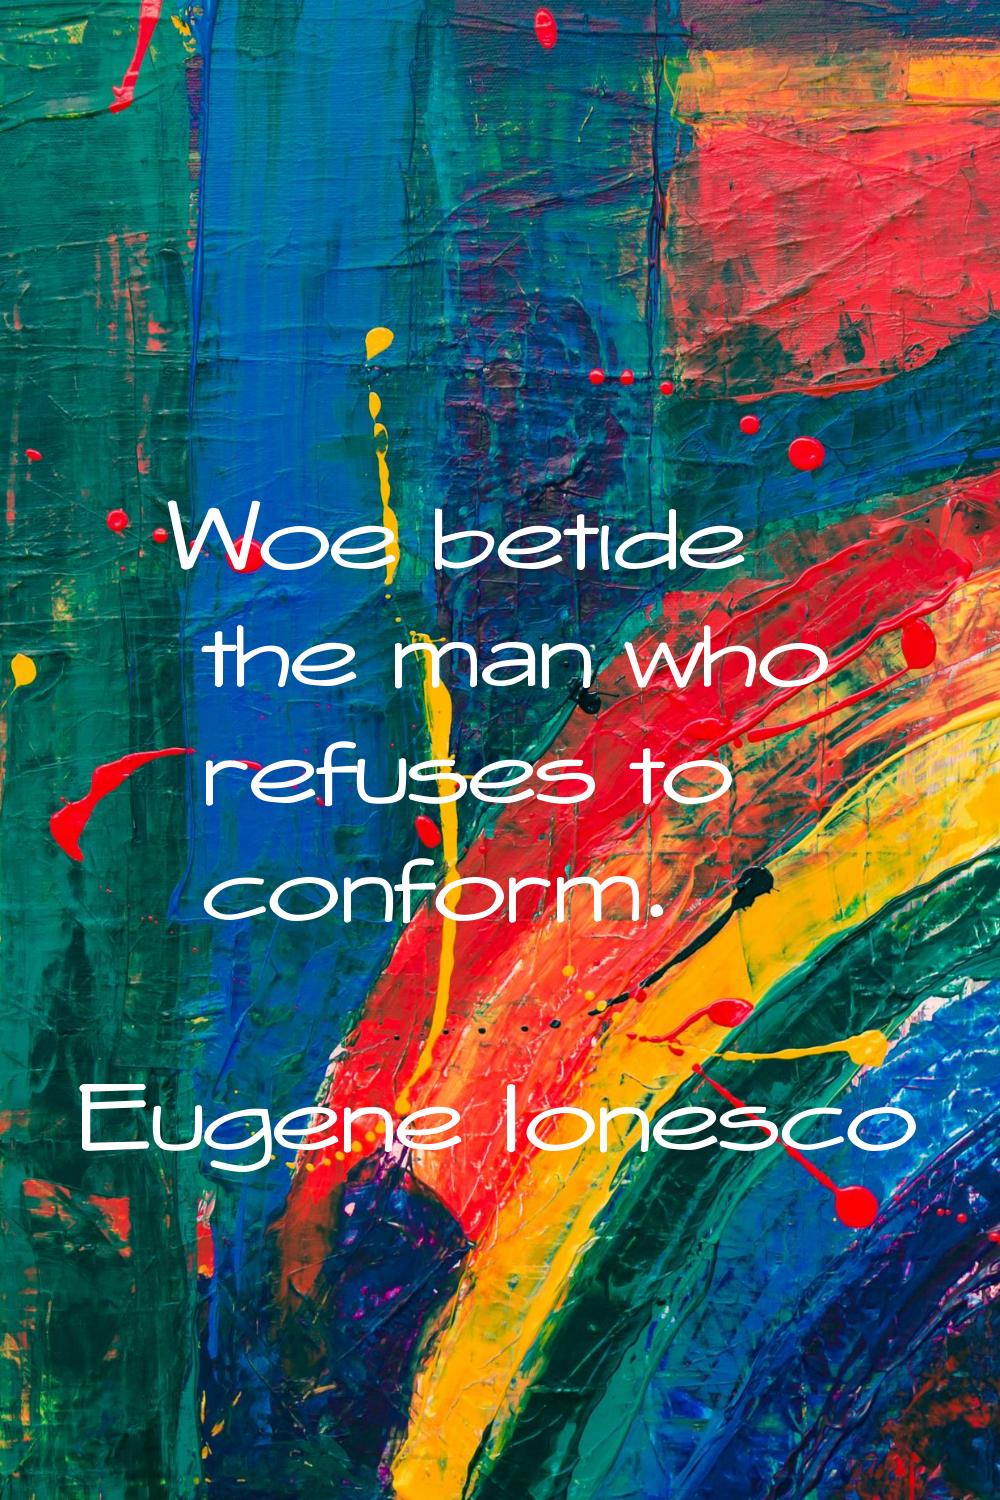 Woe betide the man who refuses to conform.